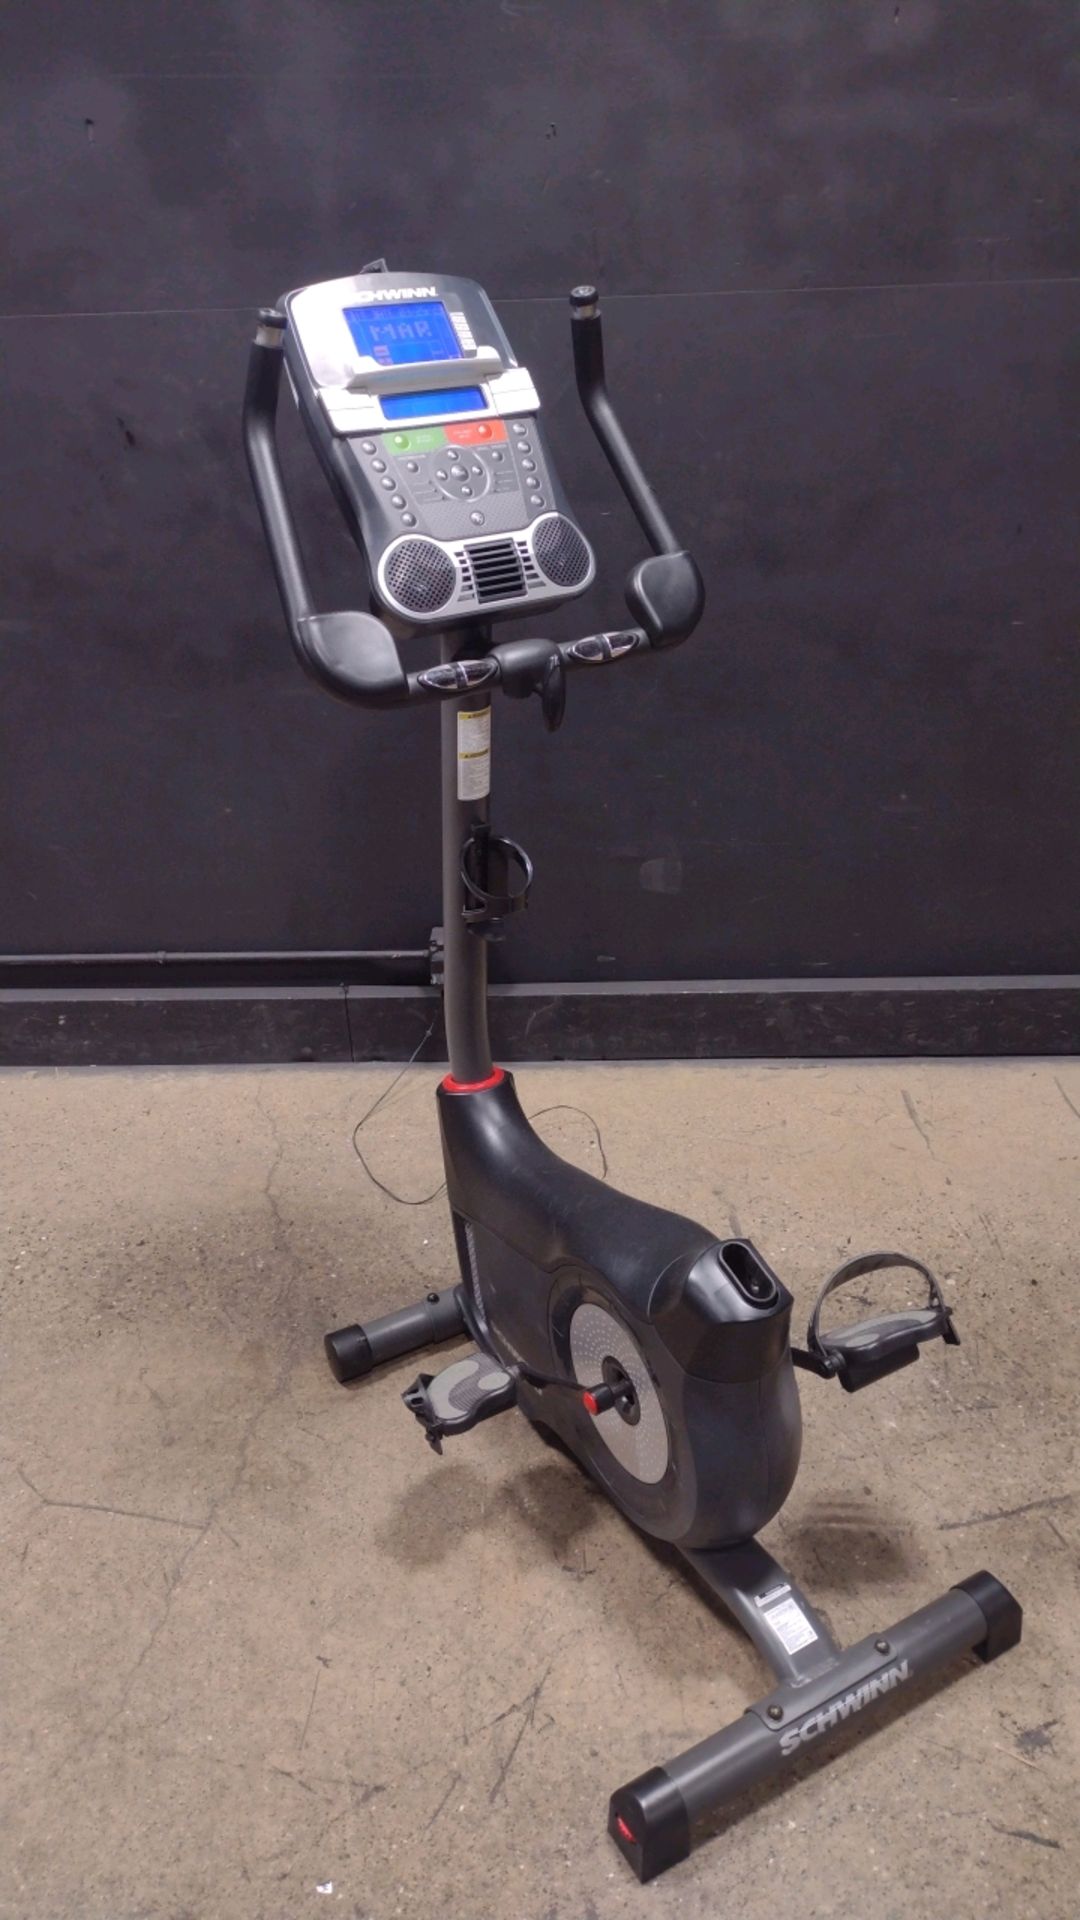 SCHWINN 170 EXERCISE BIKE (LOCATED AT 3325 MOUNT PROSPECT ROAD, FRANKLIN PARK, IL, 60131)